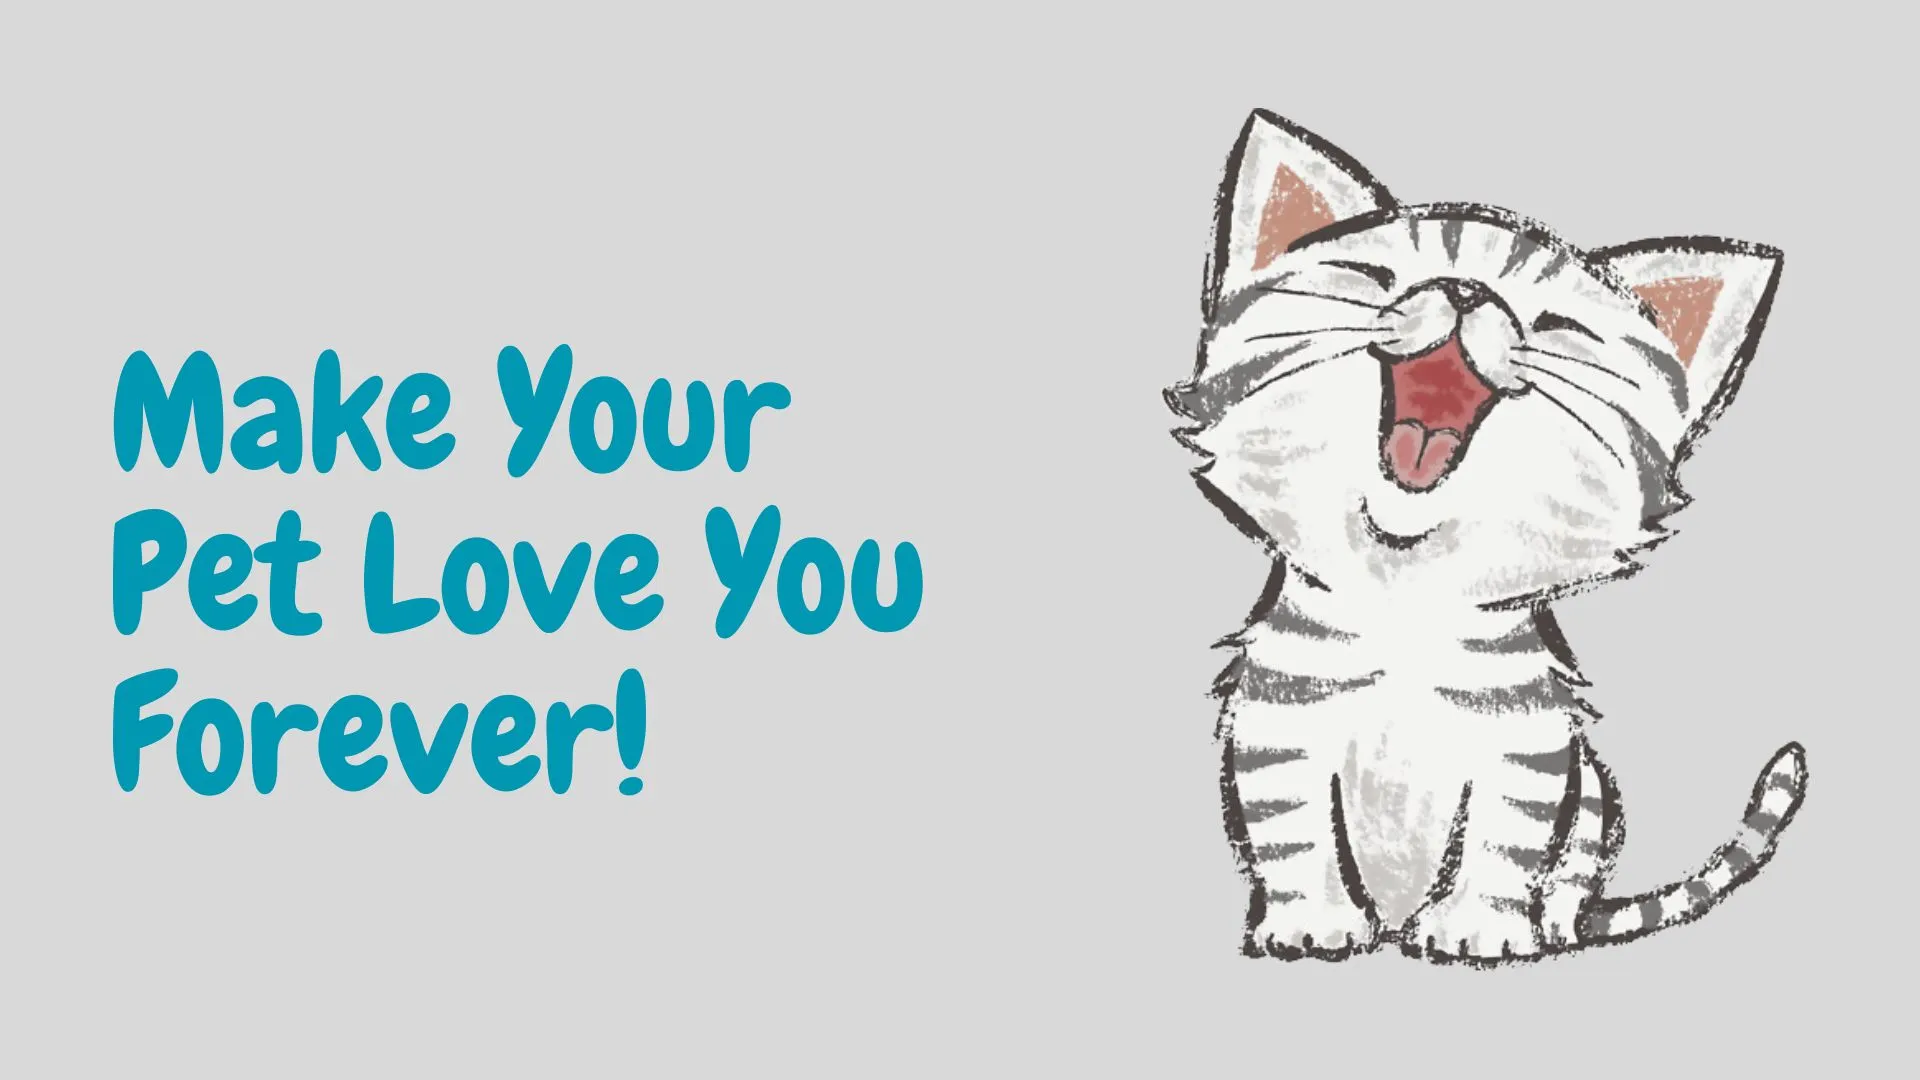 Make Your Pet Love You Forever